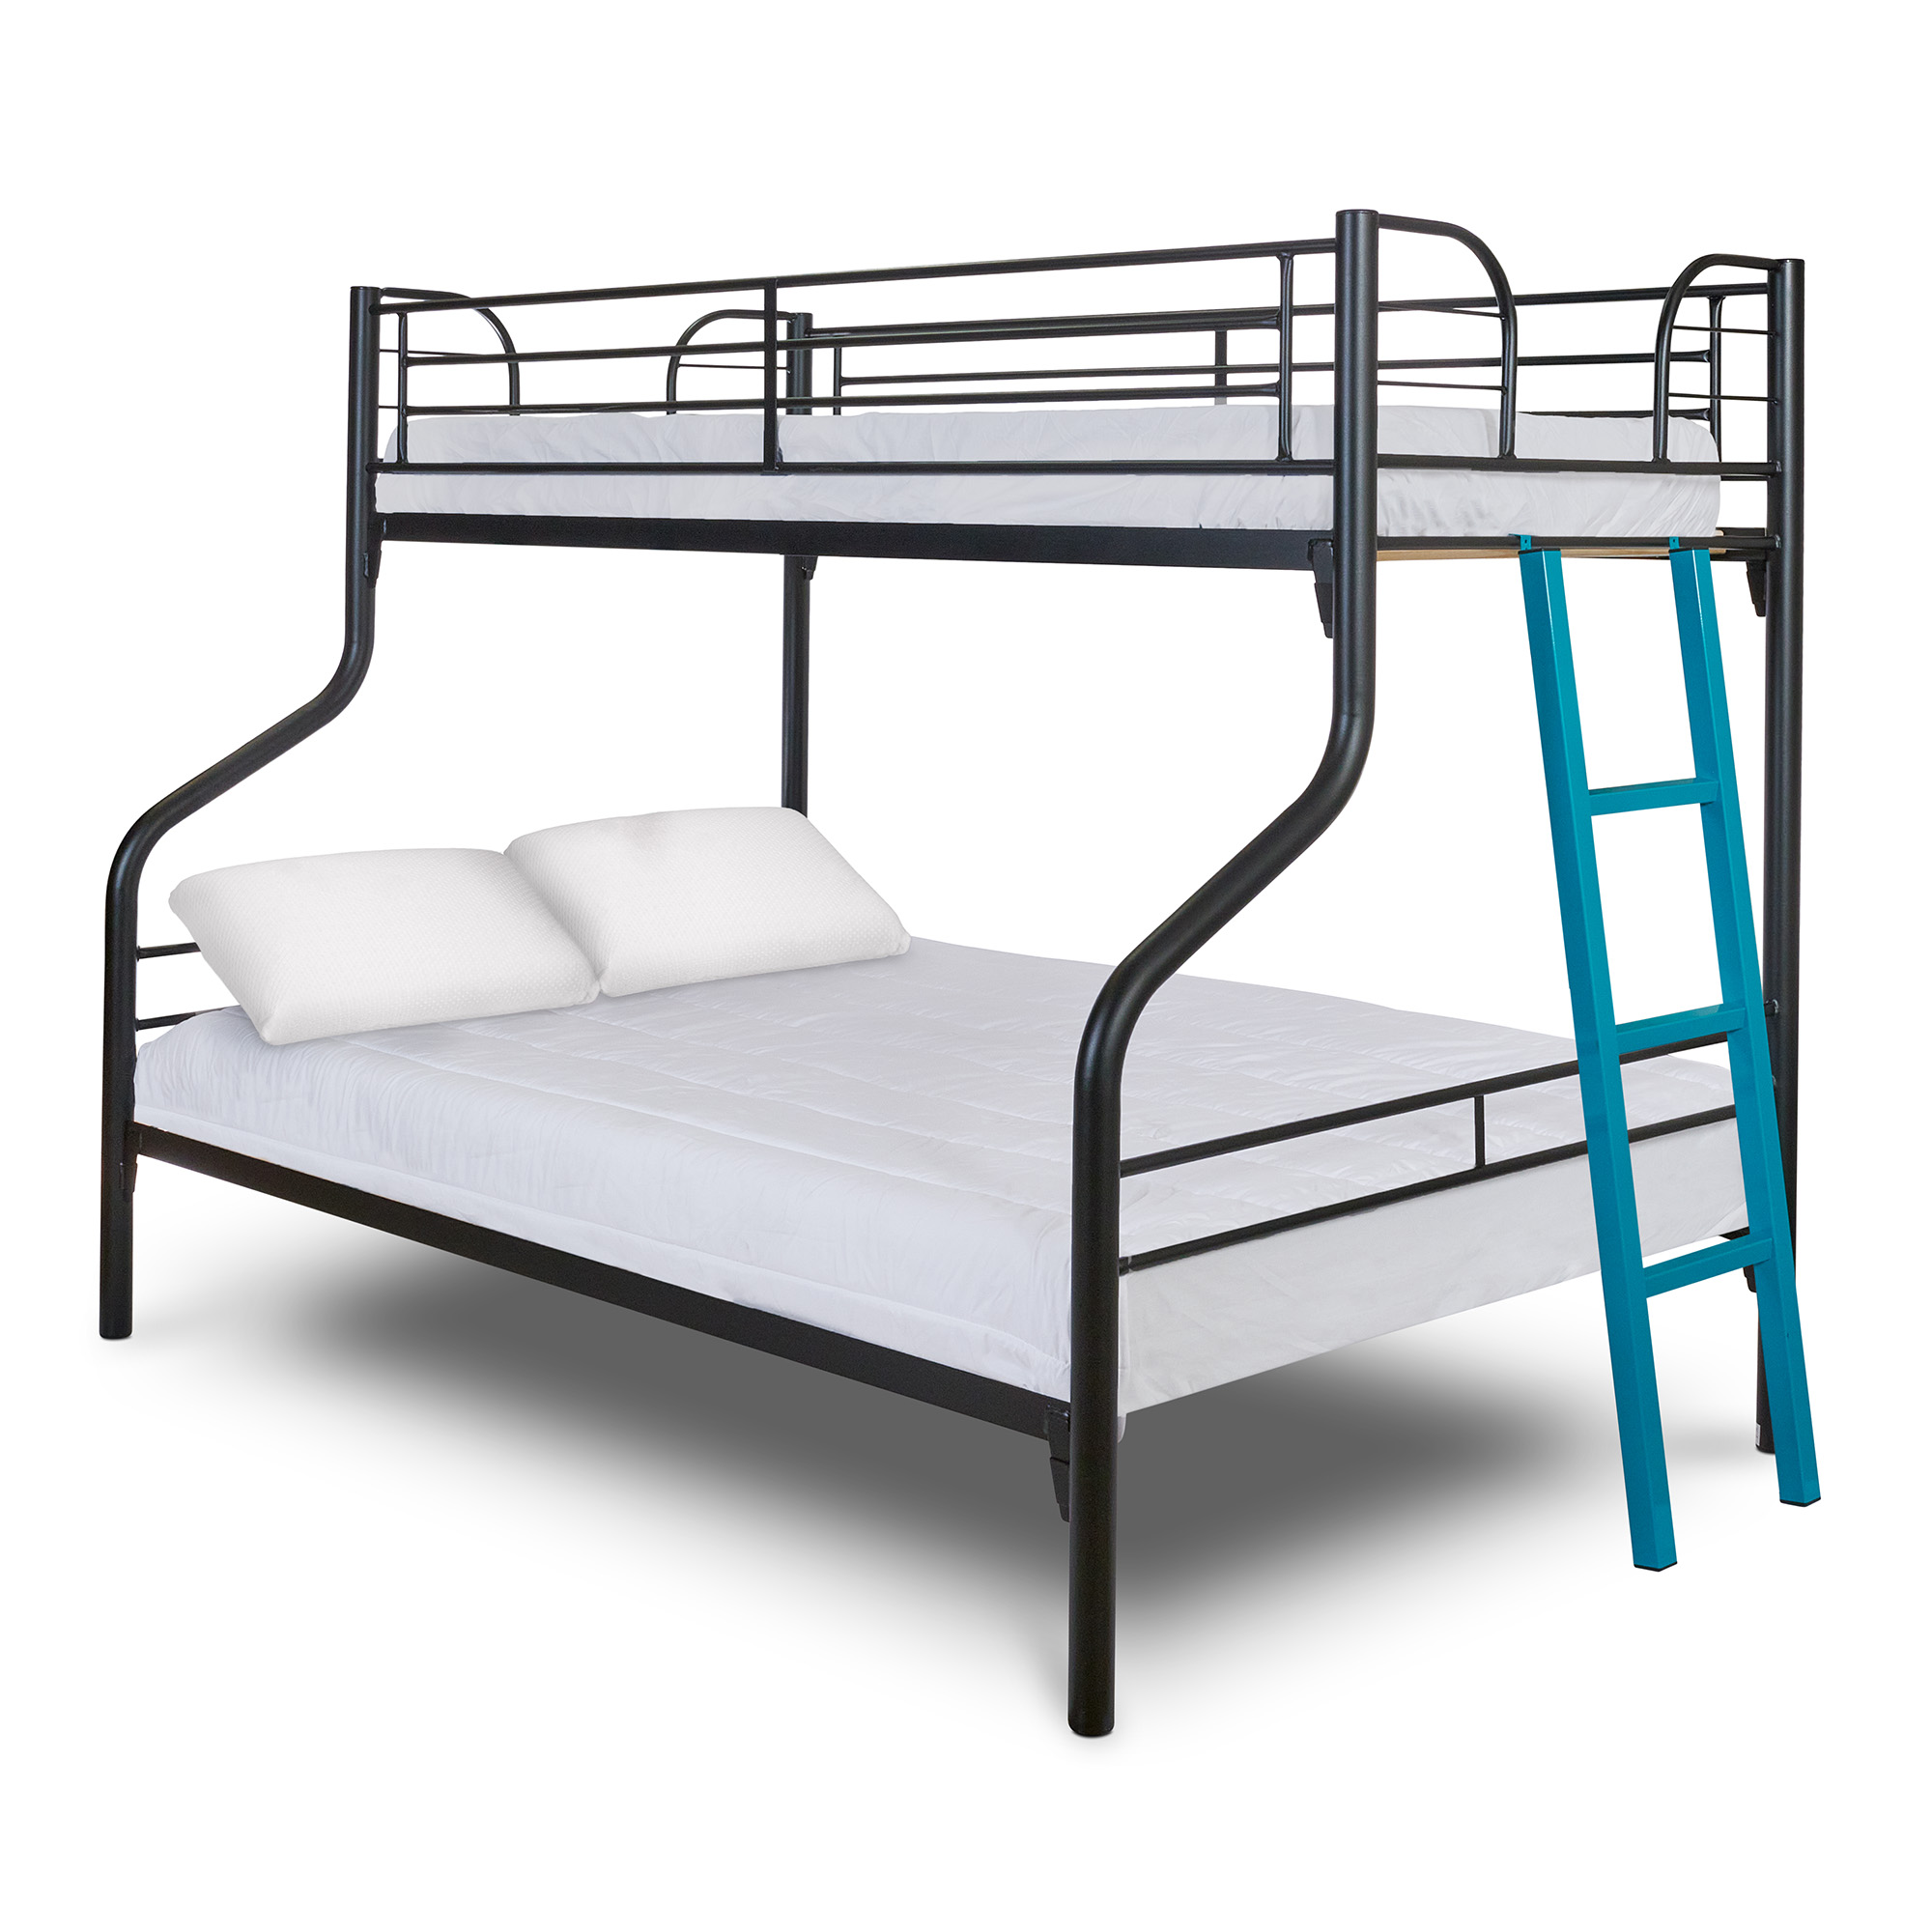 Archer Single Over Double Bunk Bed, Single Over Single Bunk Bed